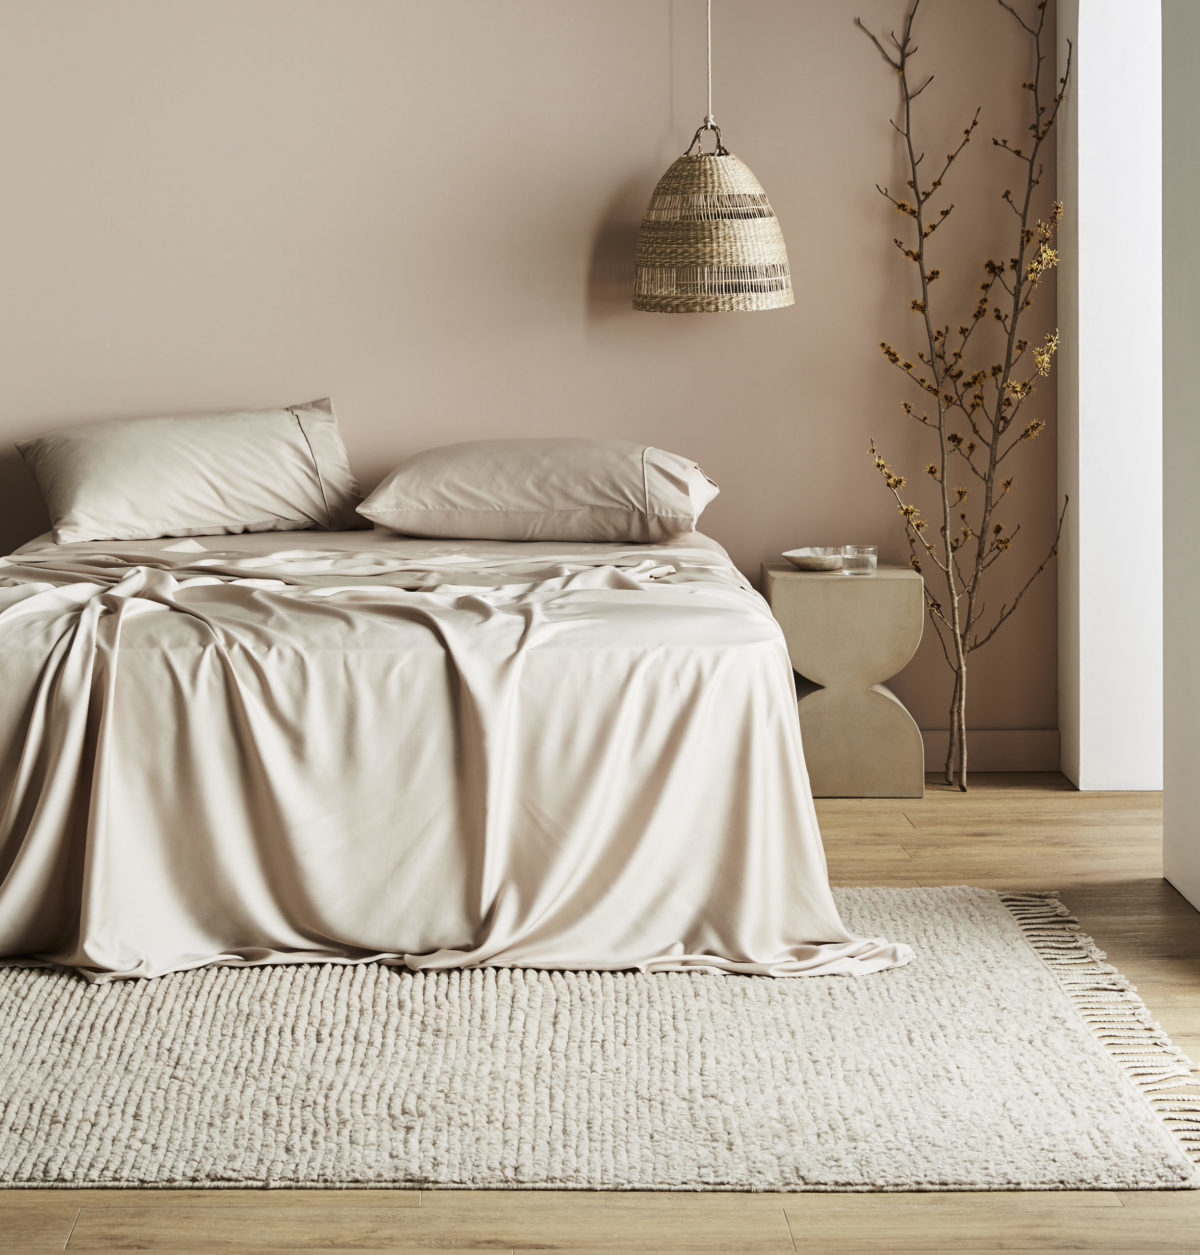 A picture of a tan duvet and sheet set